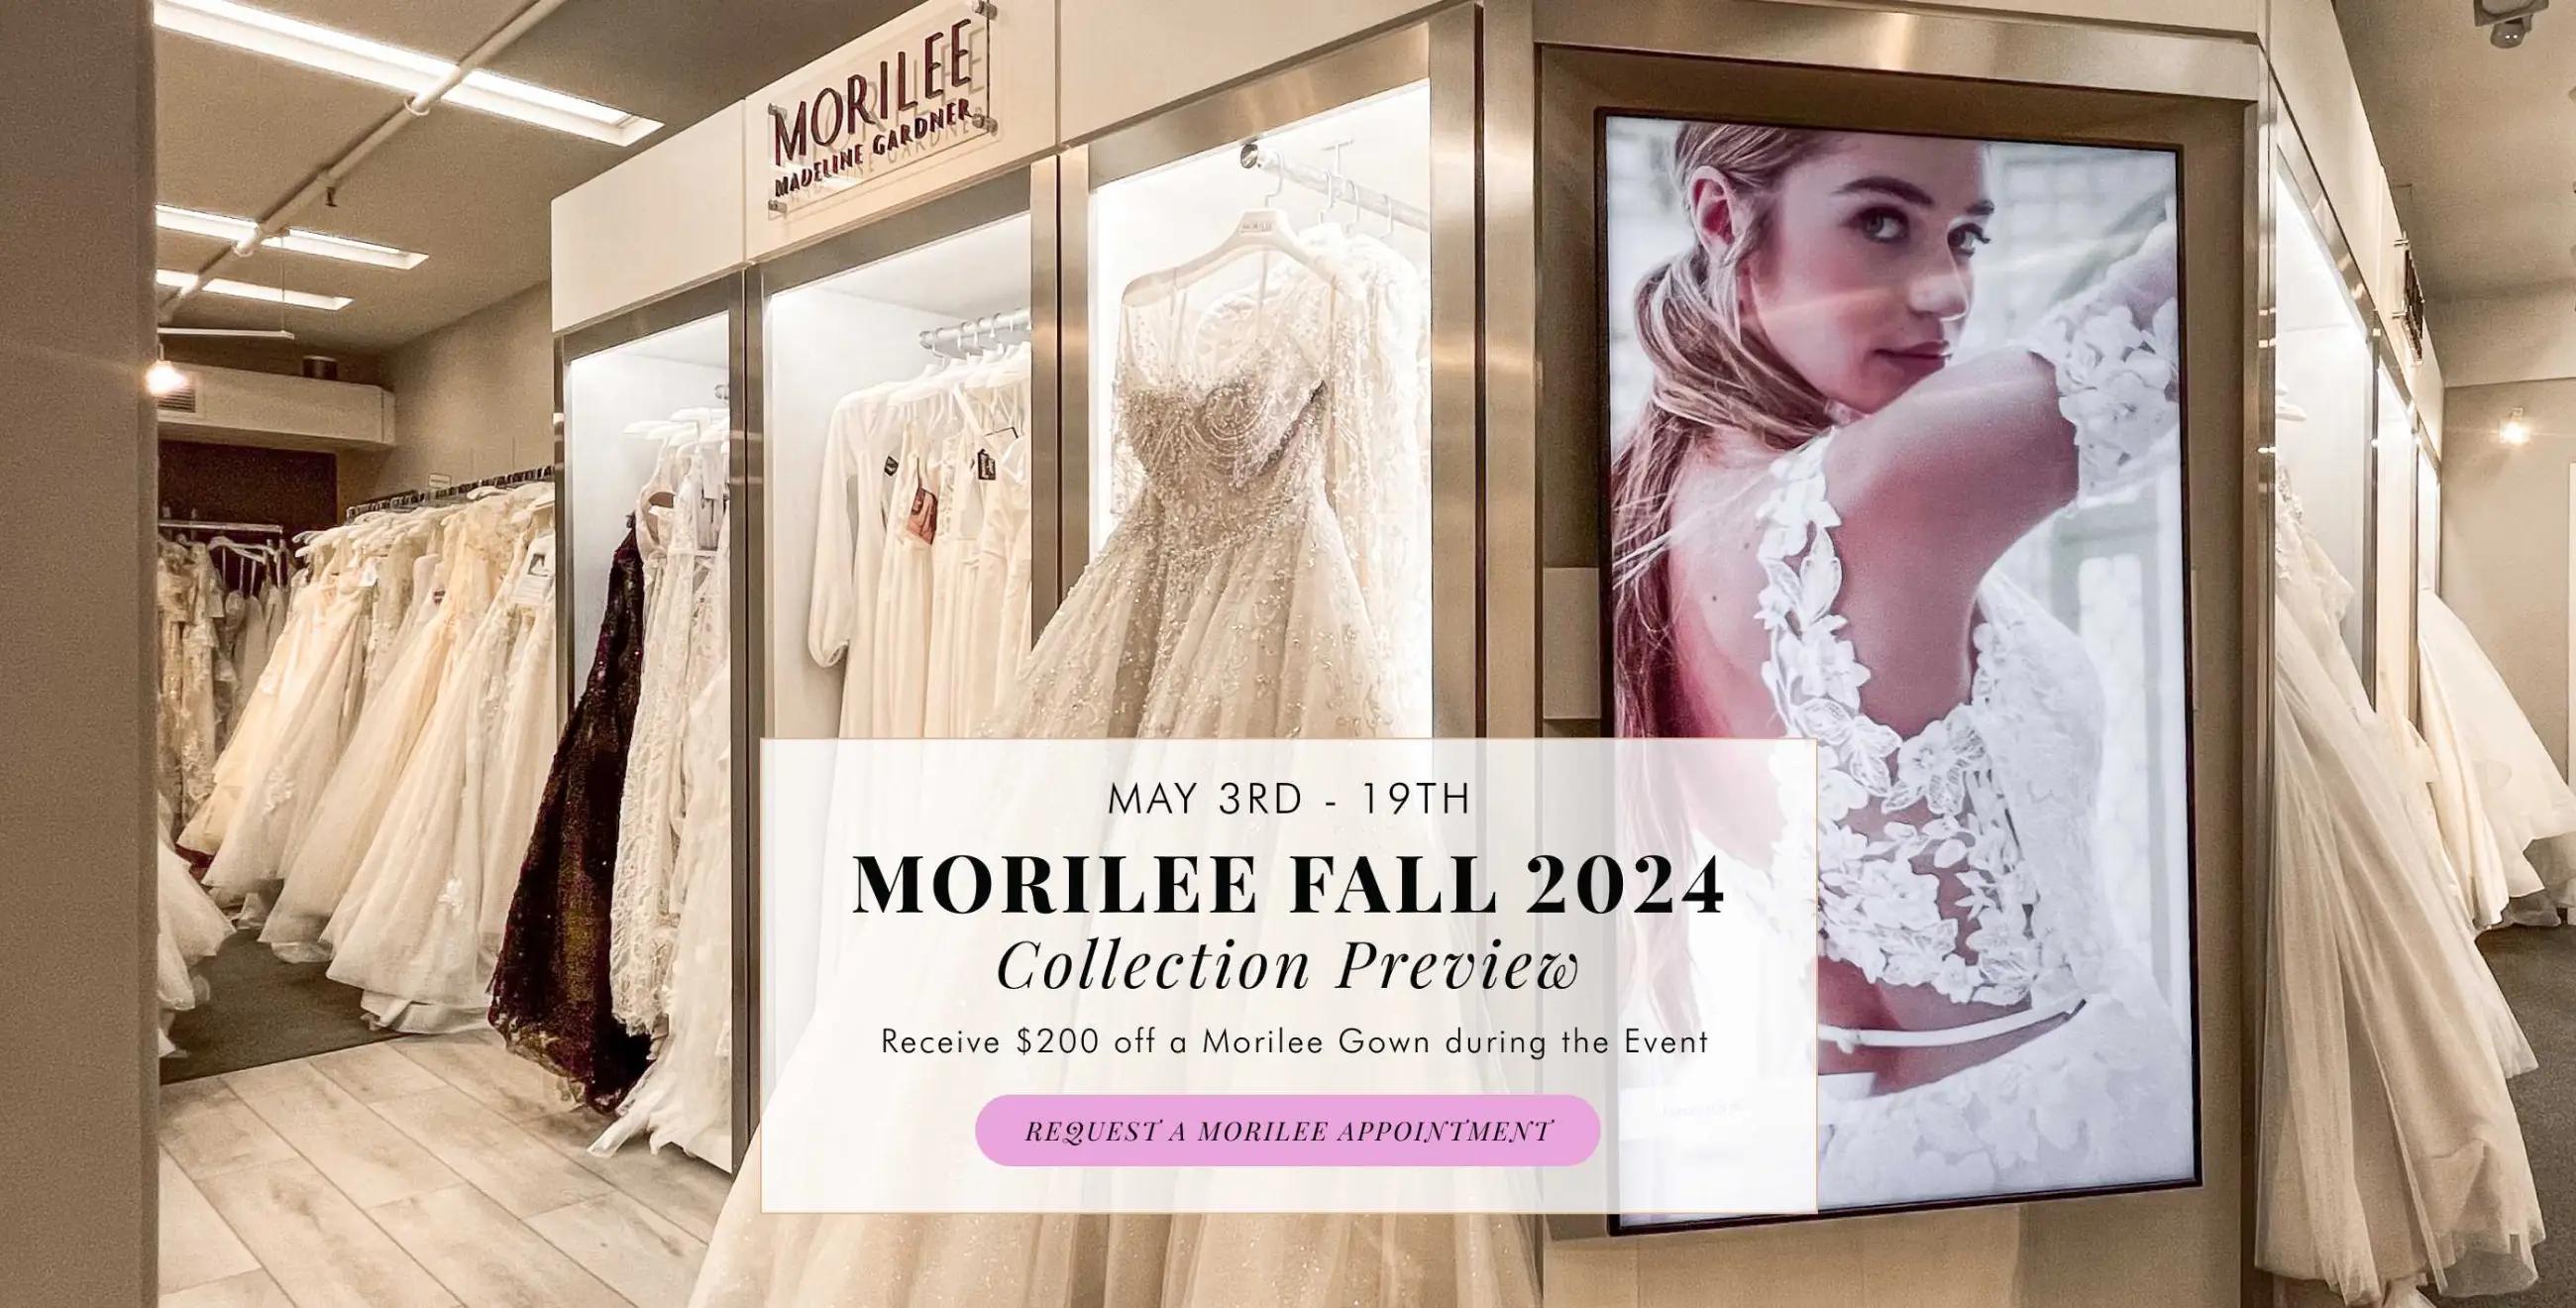 Morilee event at Trudys Brides